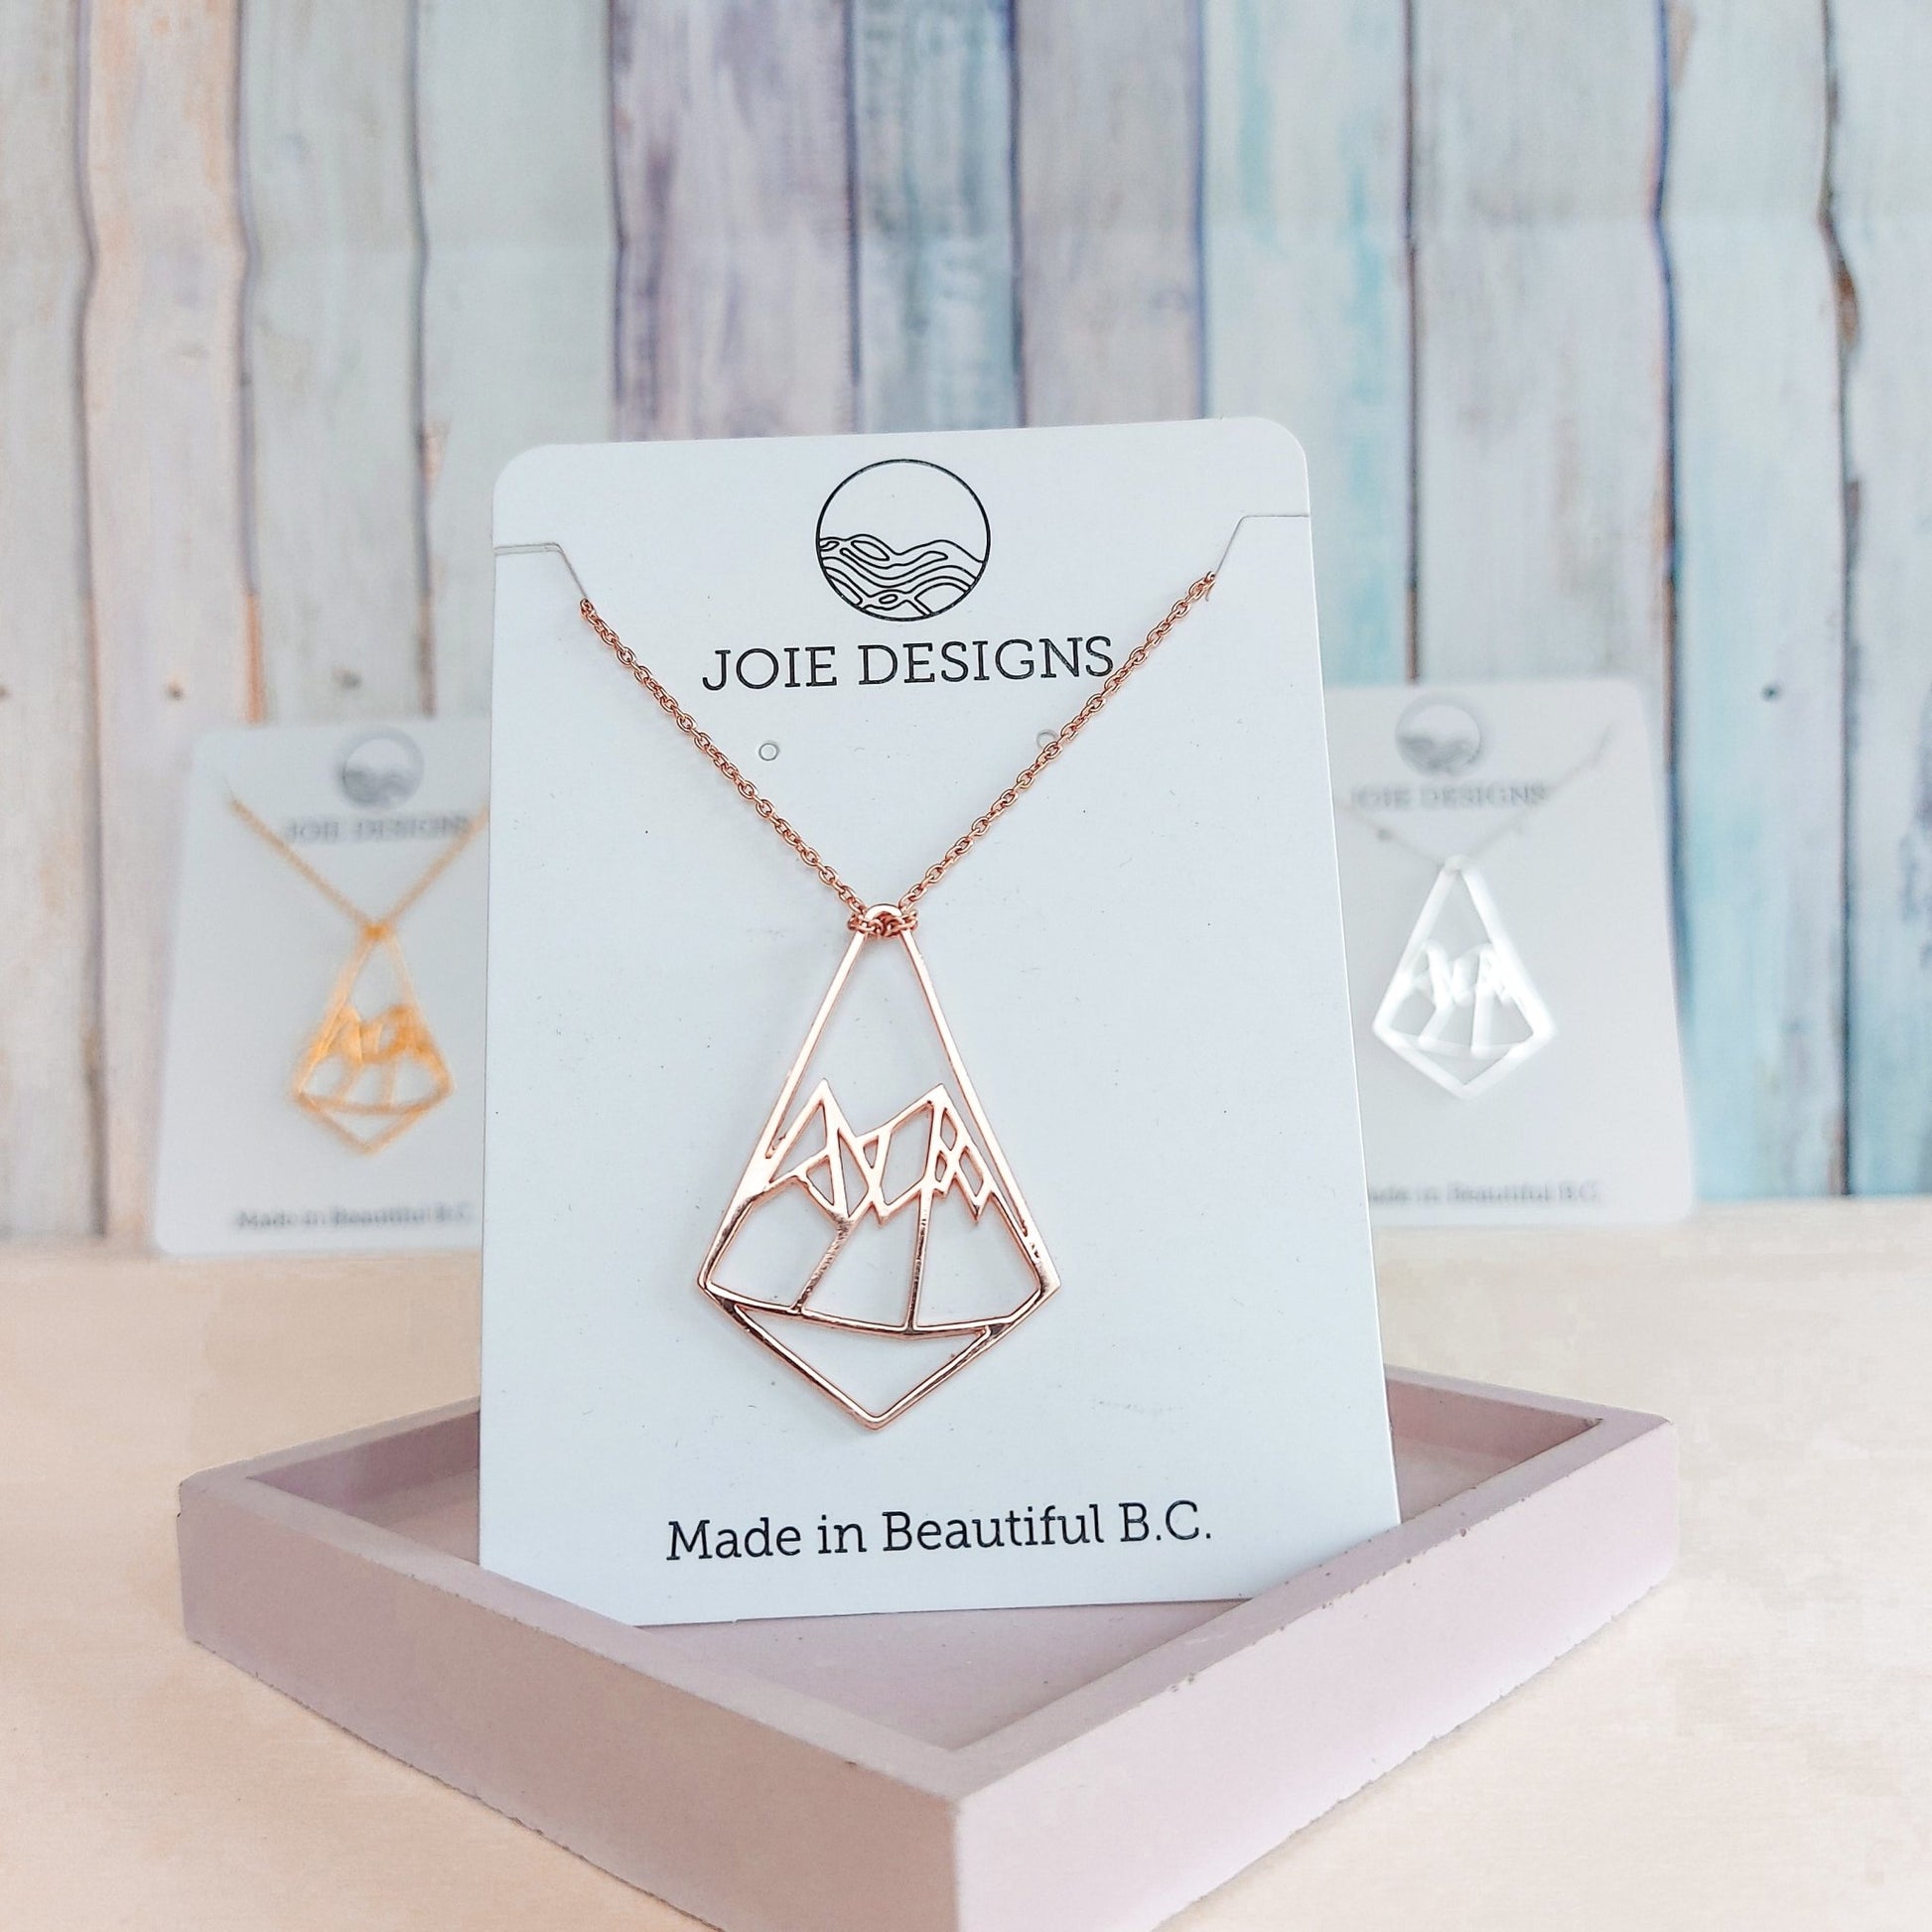 18k rose gold plated geo mountain design pendant necklace showcased on a jewelry card